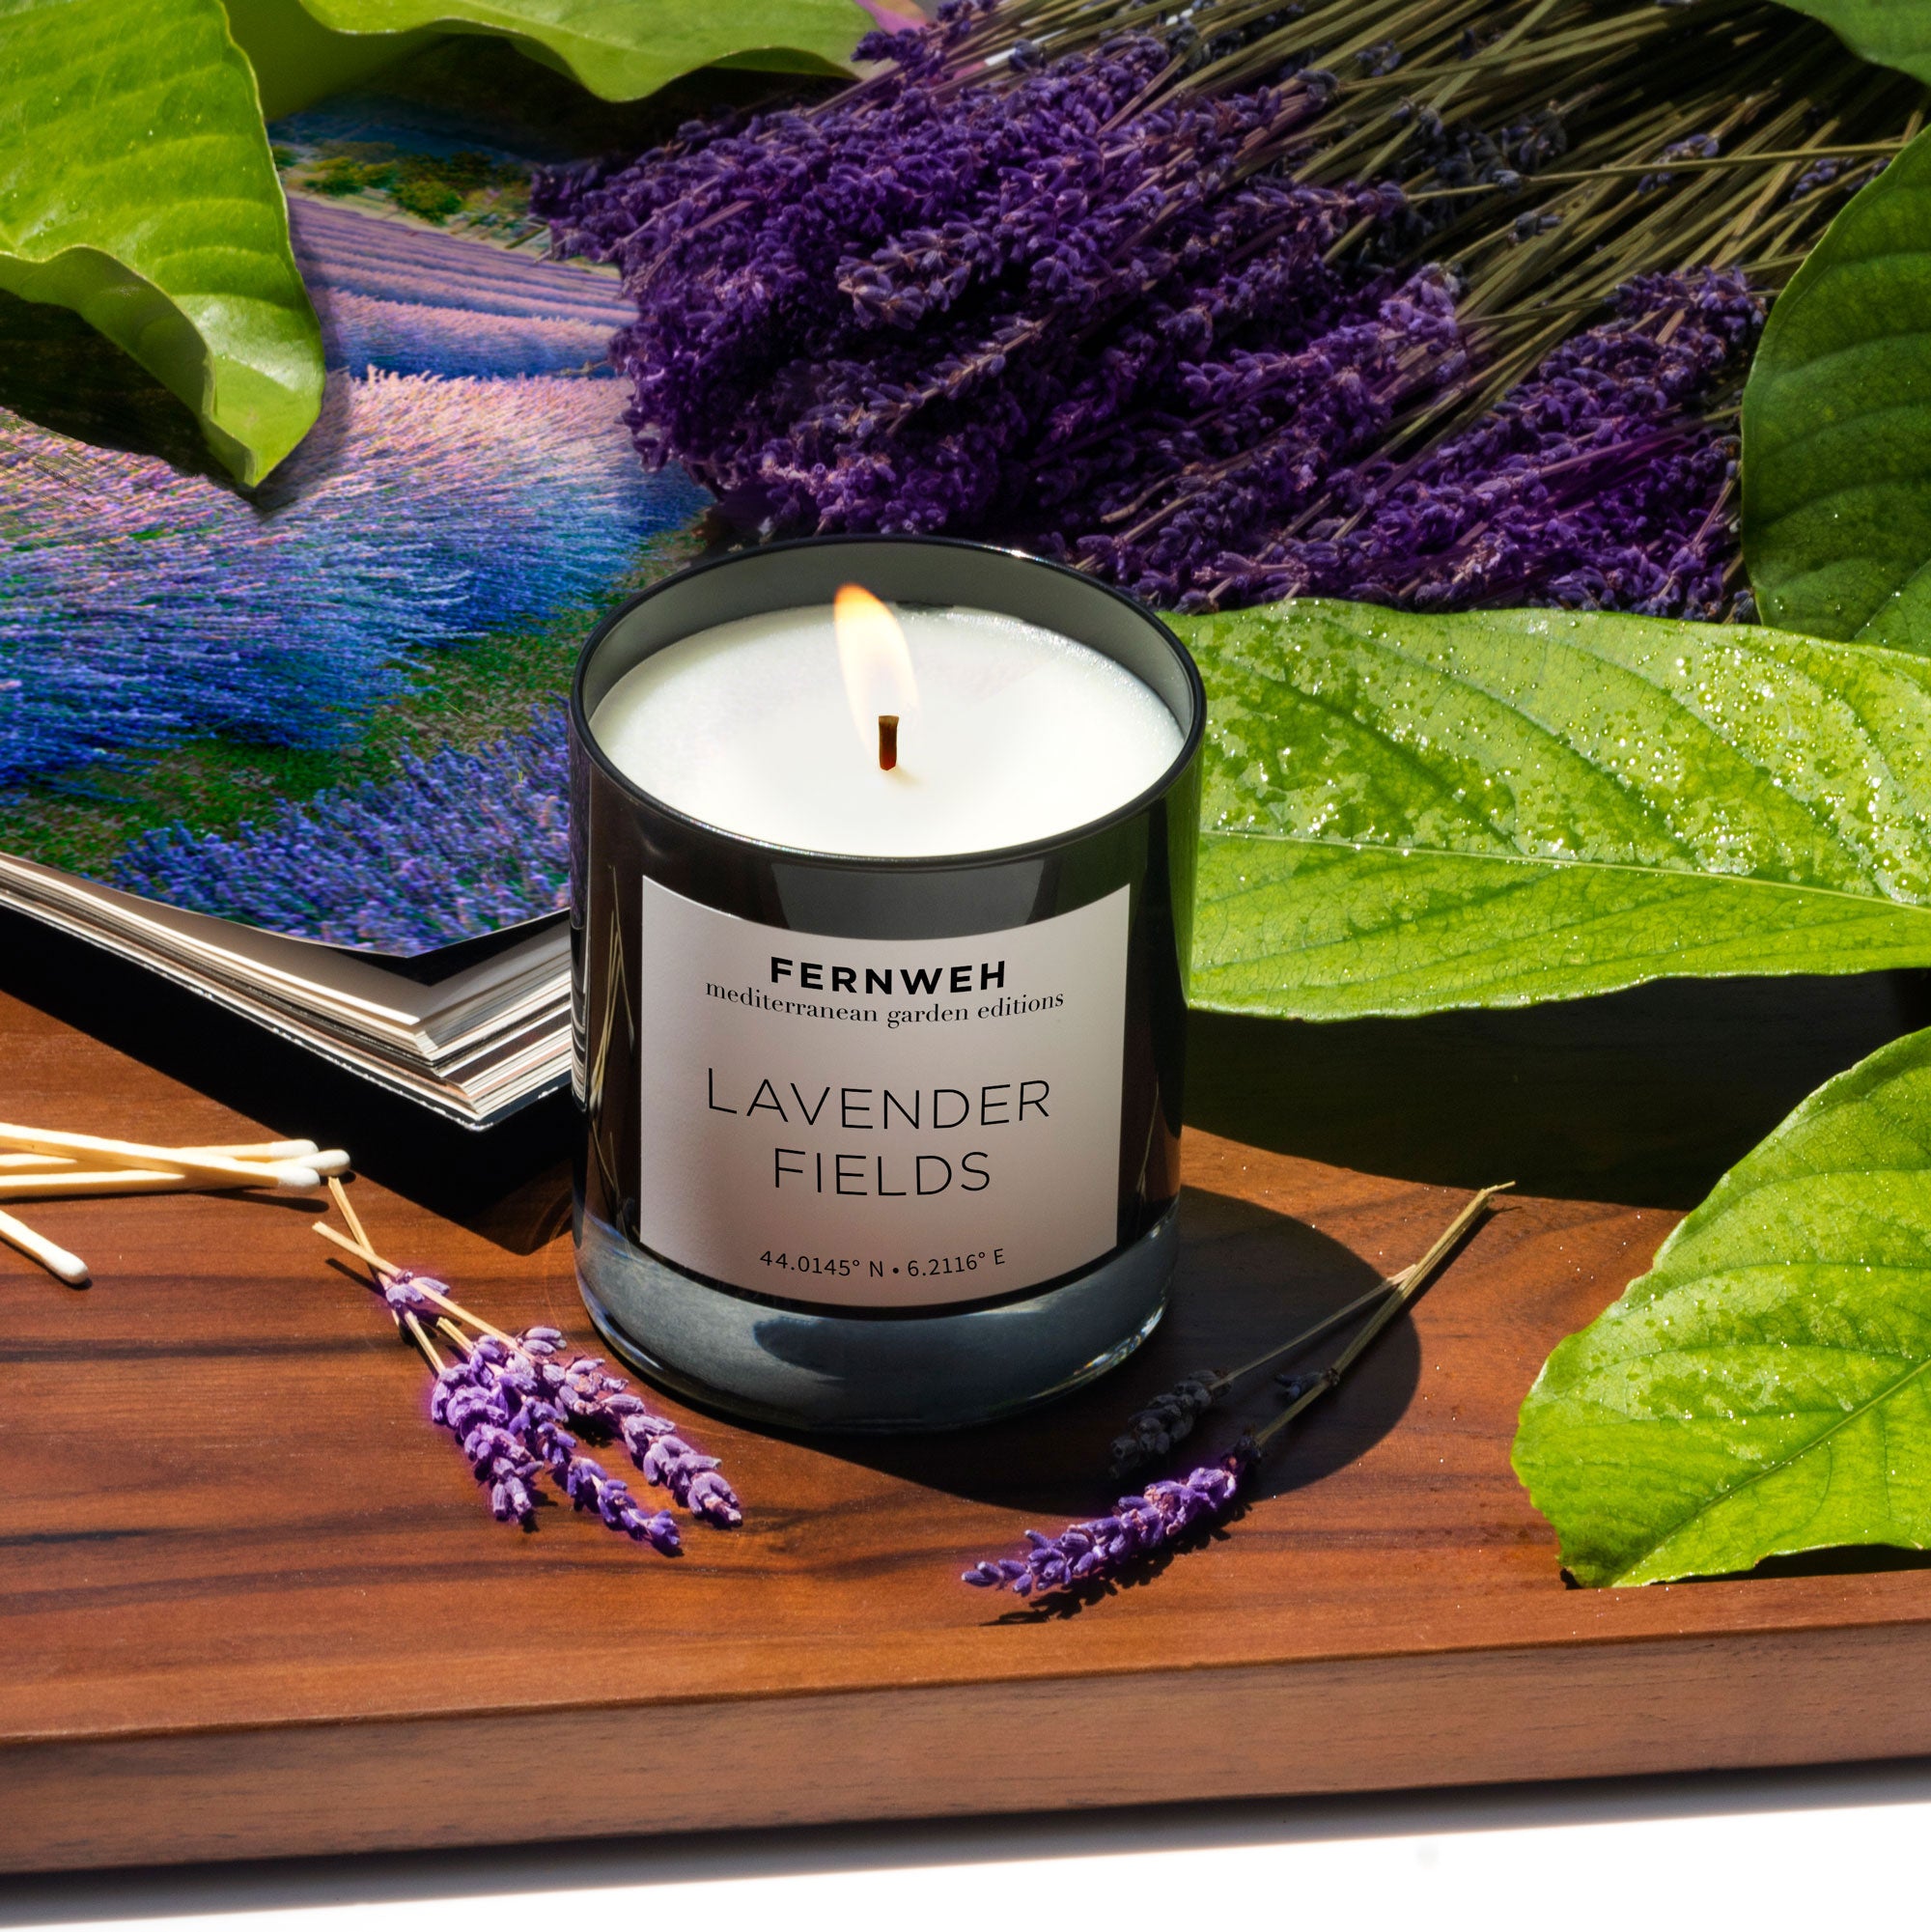 Lavender Candle Scent